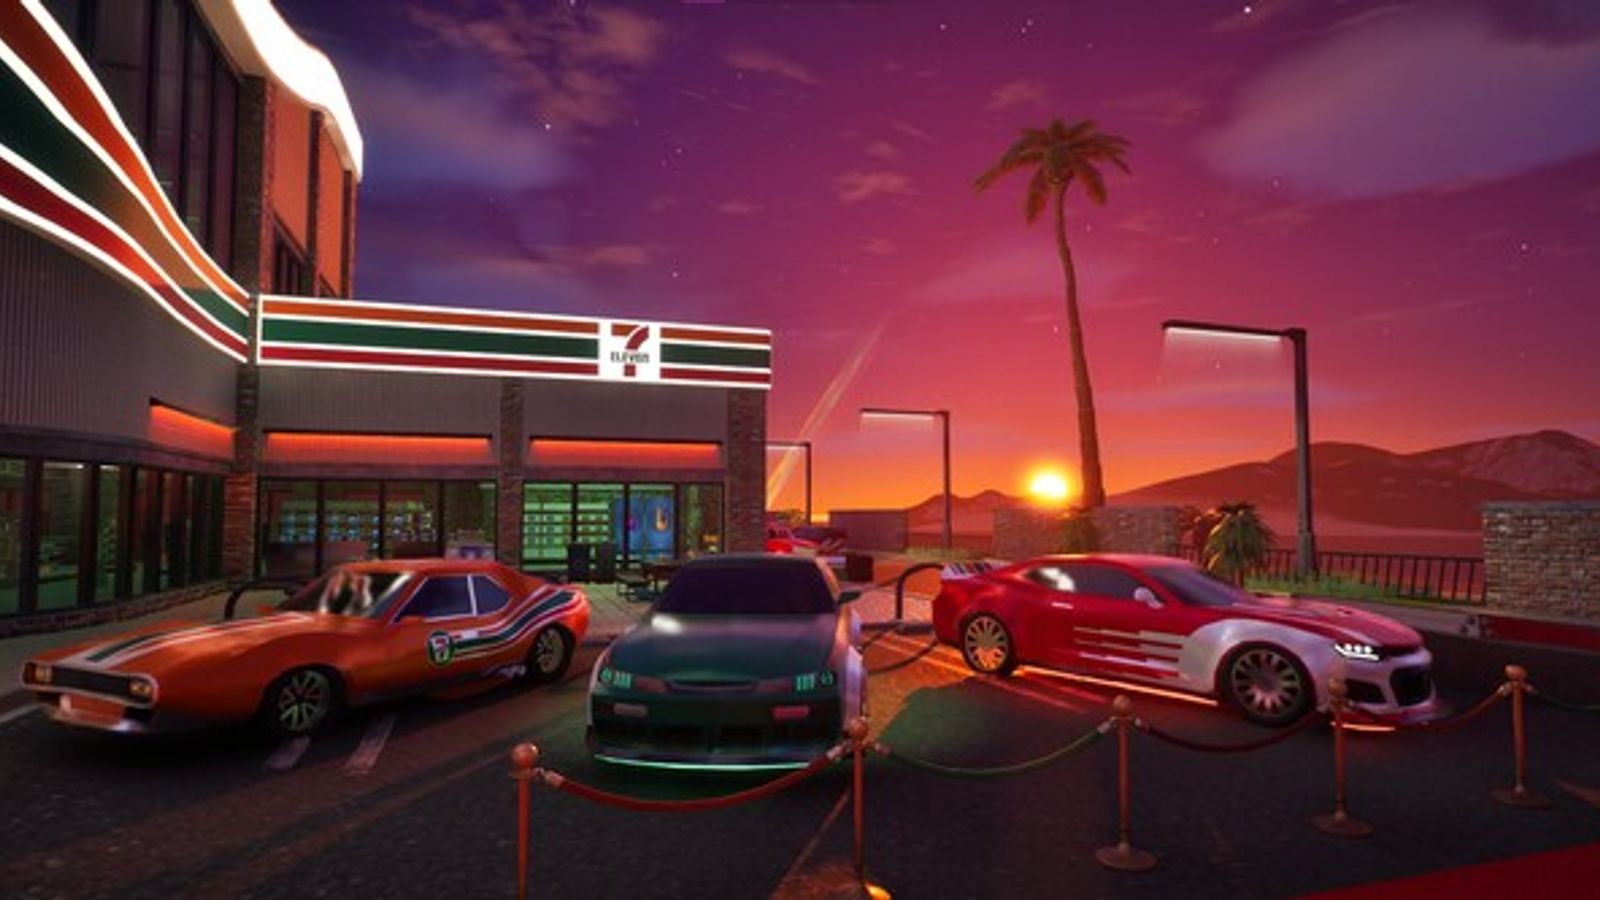 7-Eleven Takes Its Car Advertising into the Virtual World